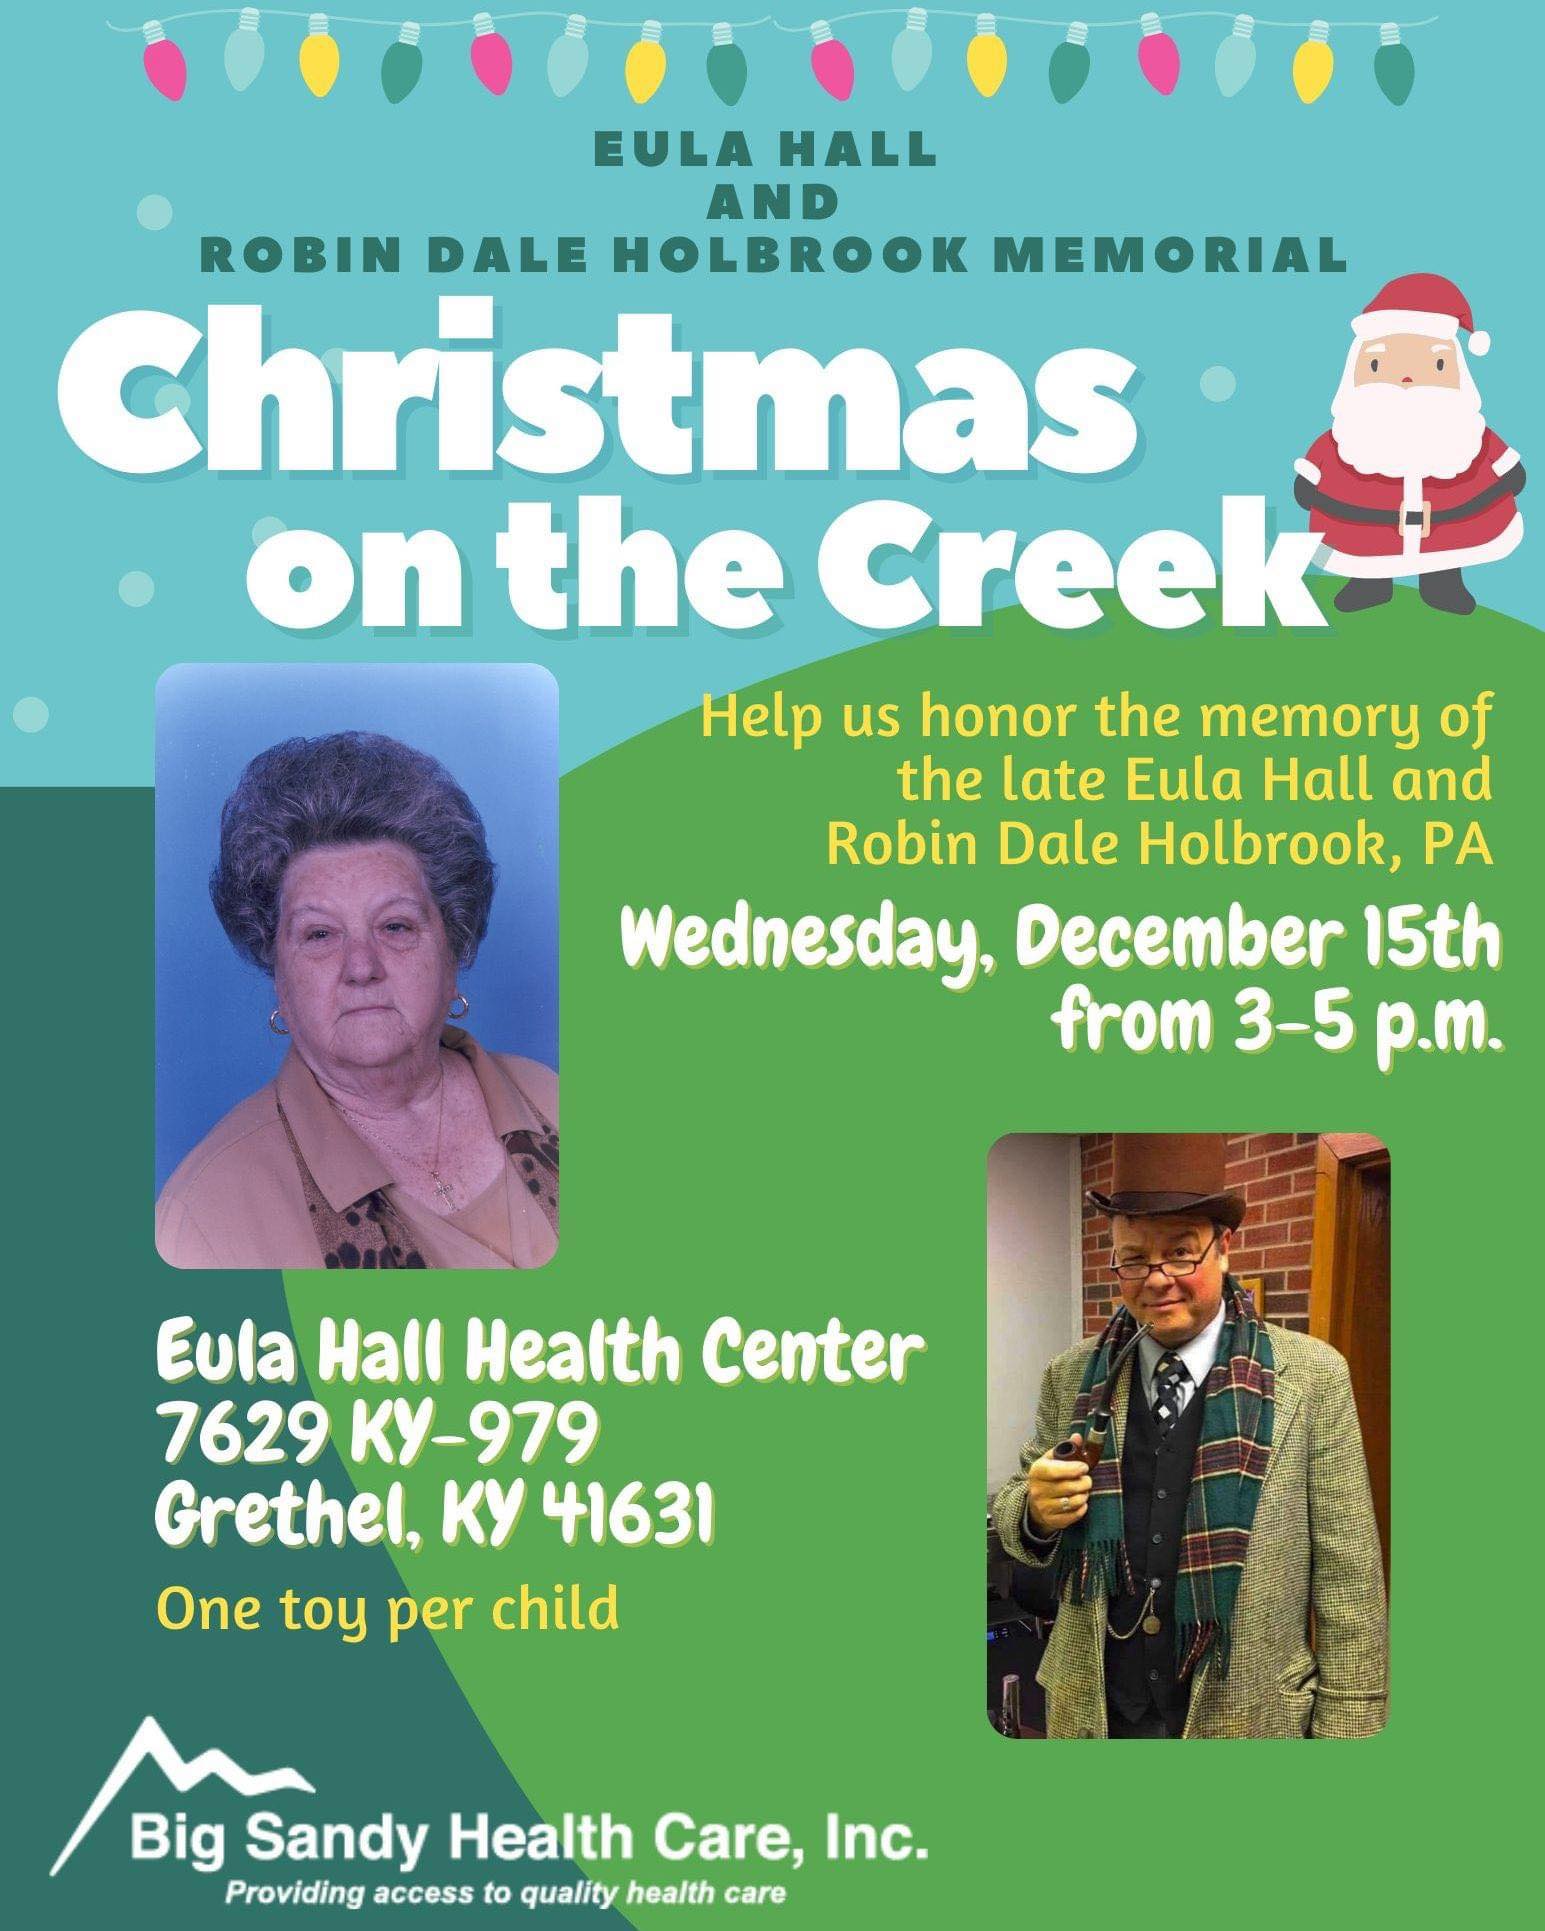 Eula Hall Health Center to Distribute Toys